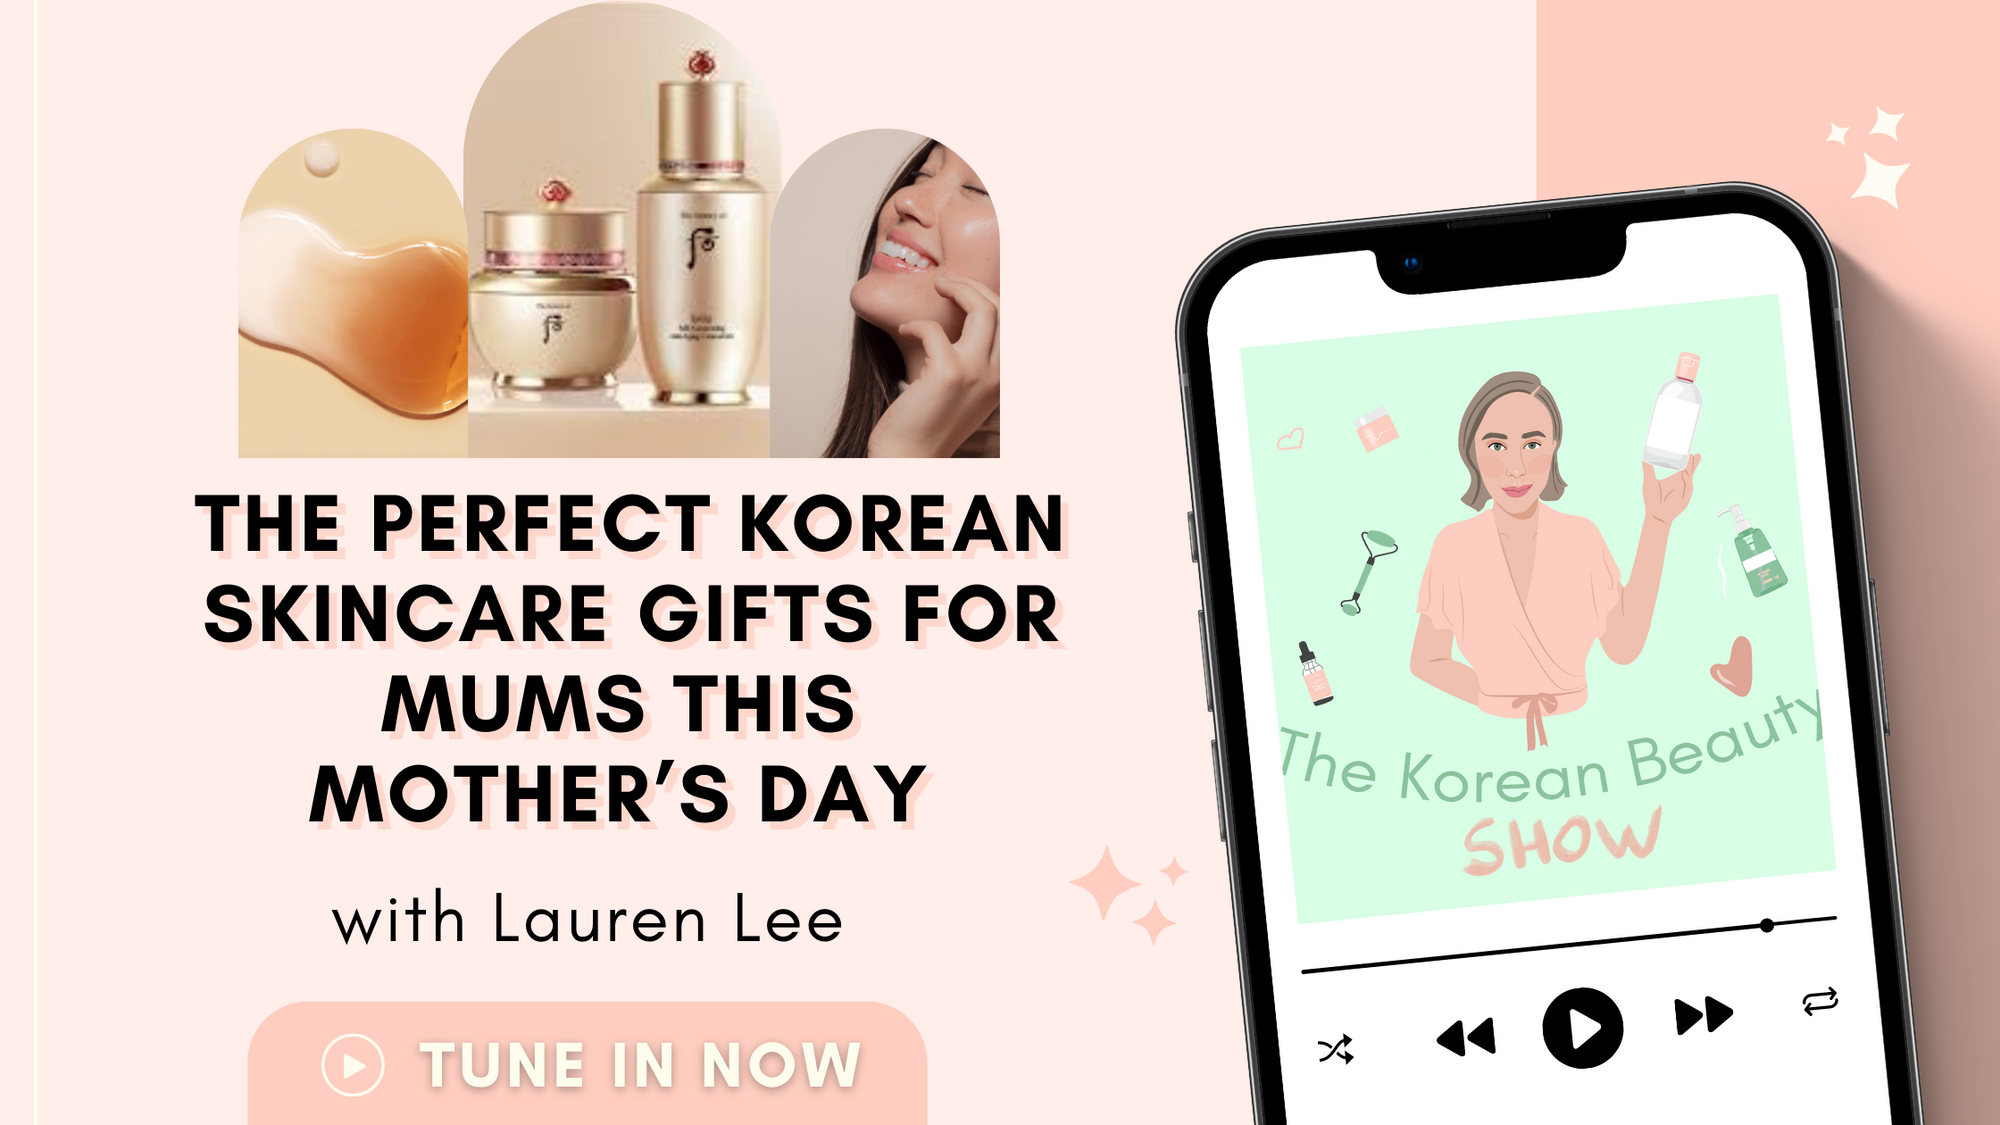 The Perfect Korean Skincare Gifts for Mums This Mother’s Day